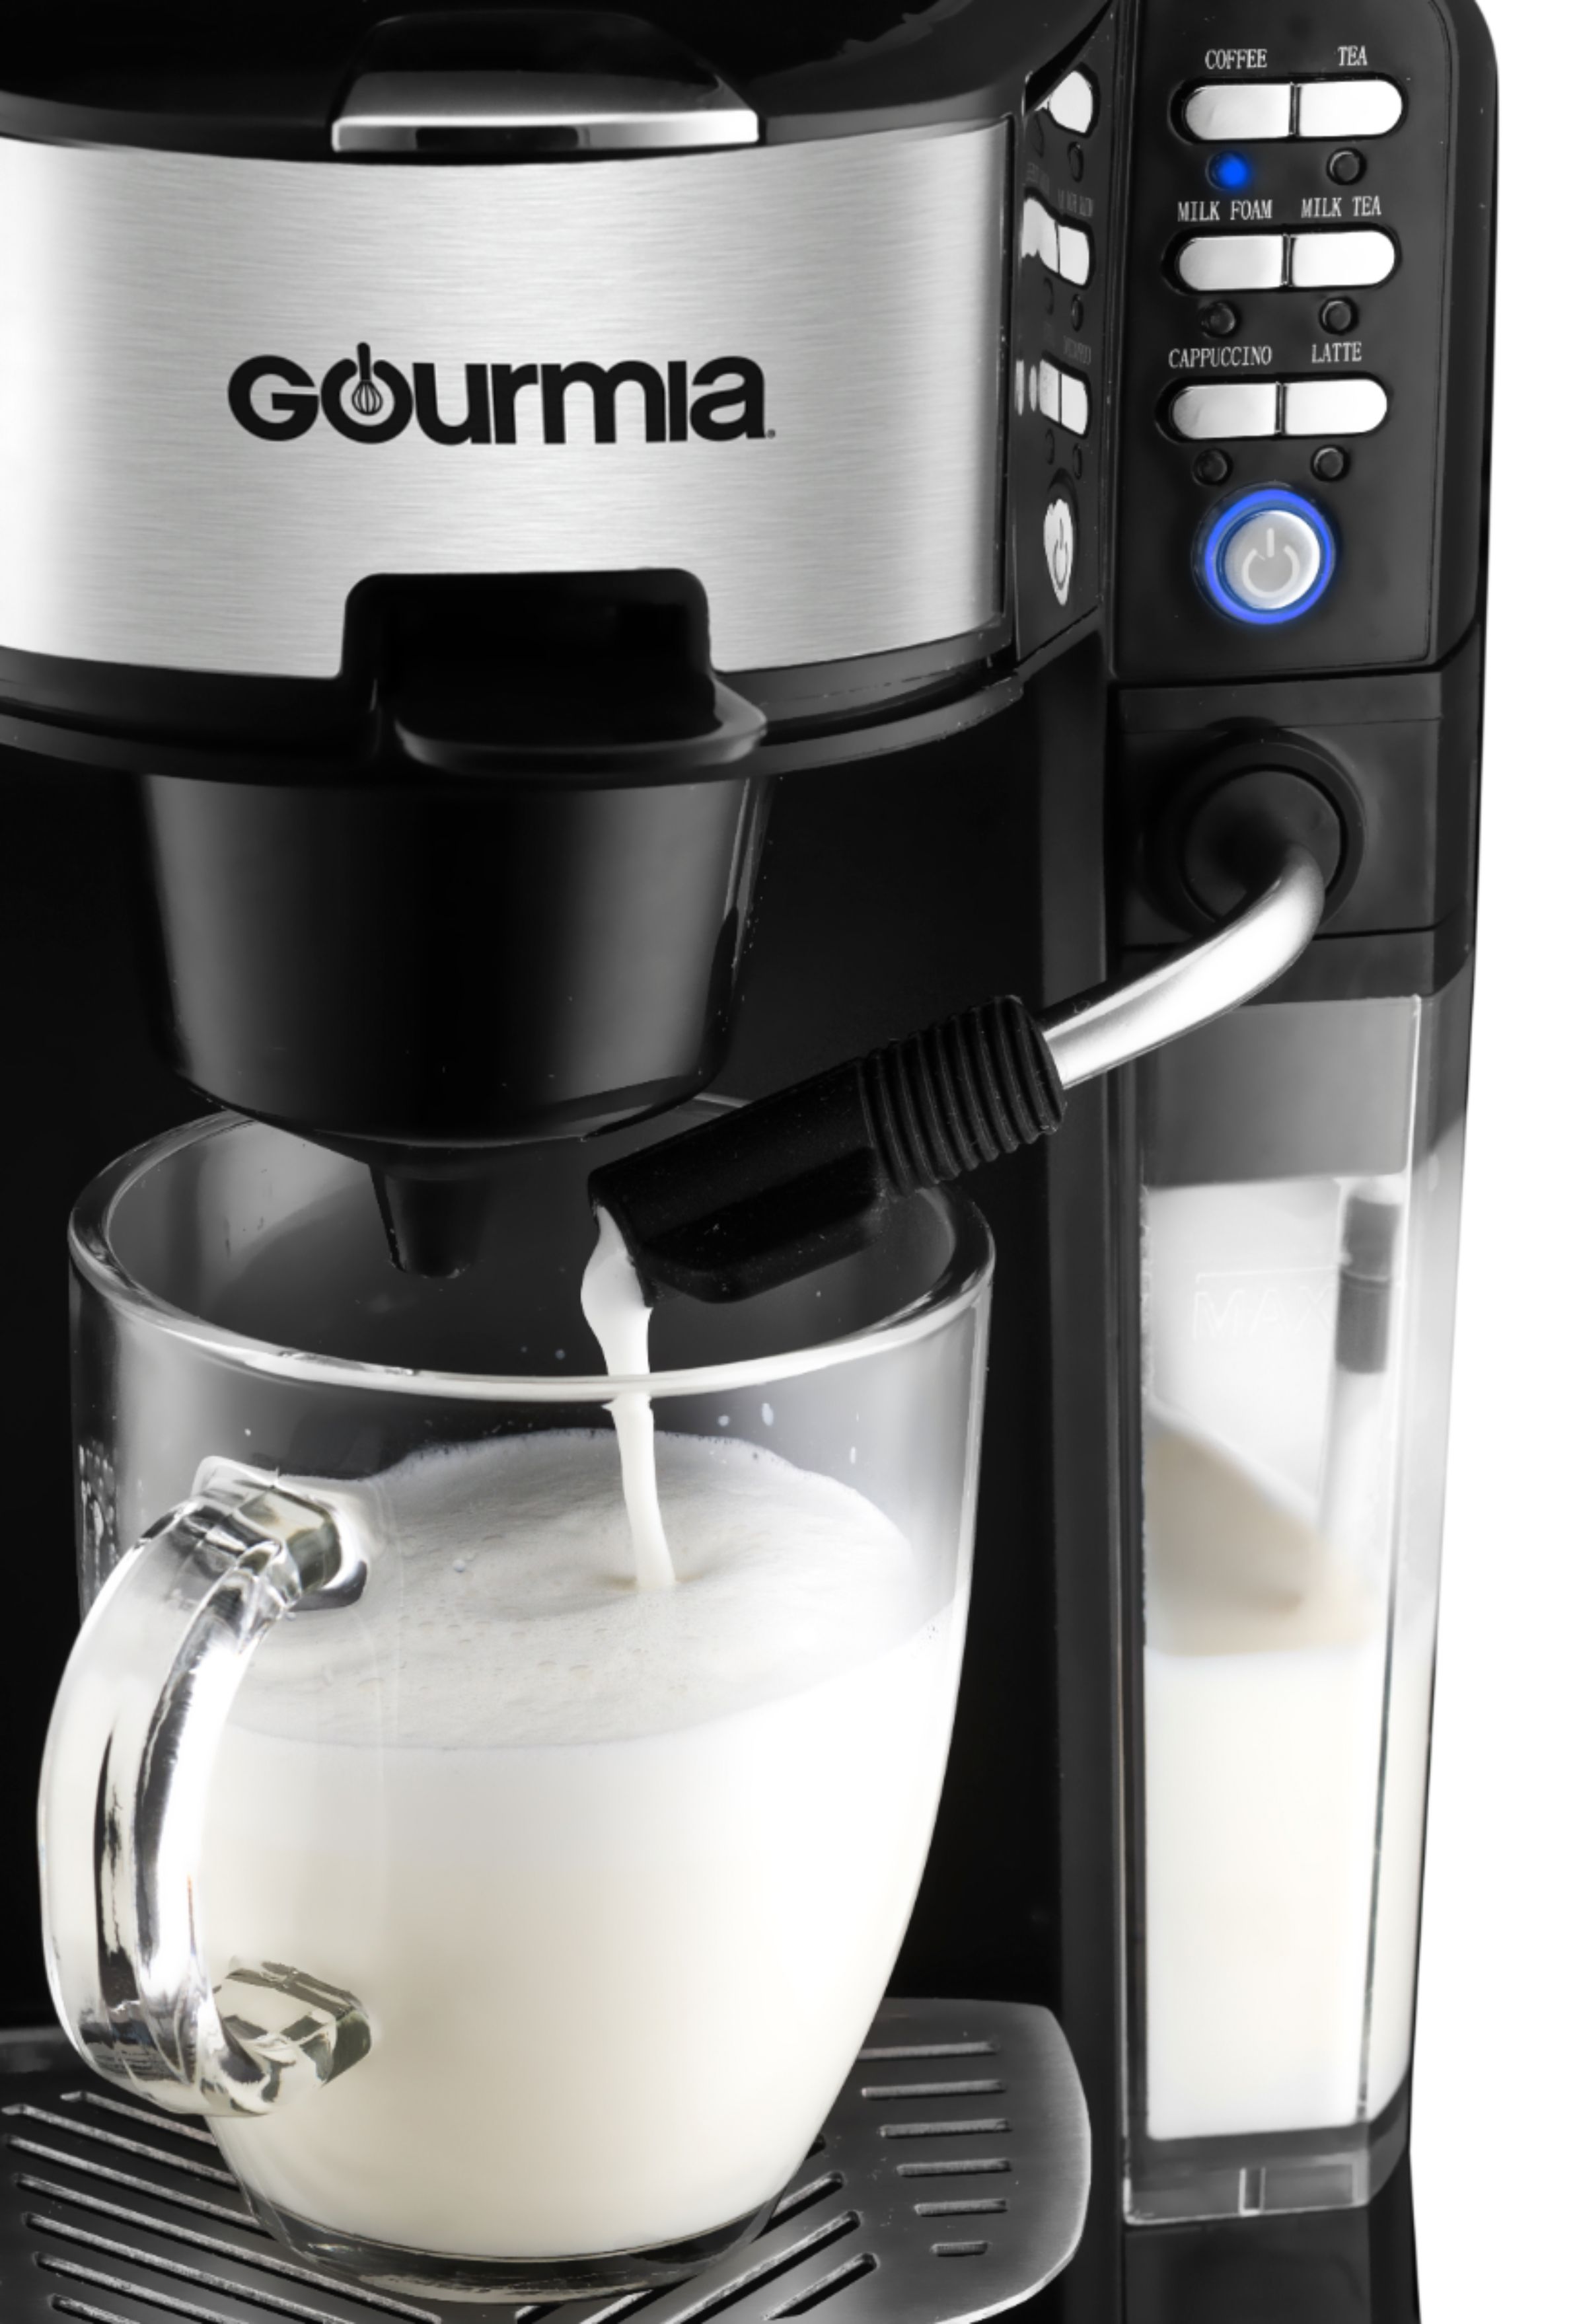 Coffee Machine, Gourmia GCM6000 6 in 1 Single Serve Coffee Maker and Milk  Frother and Steamer - Use K Cups, Coffee Grinds or Tea Leaves – One Touch  Buttons for Lattes and